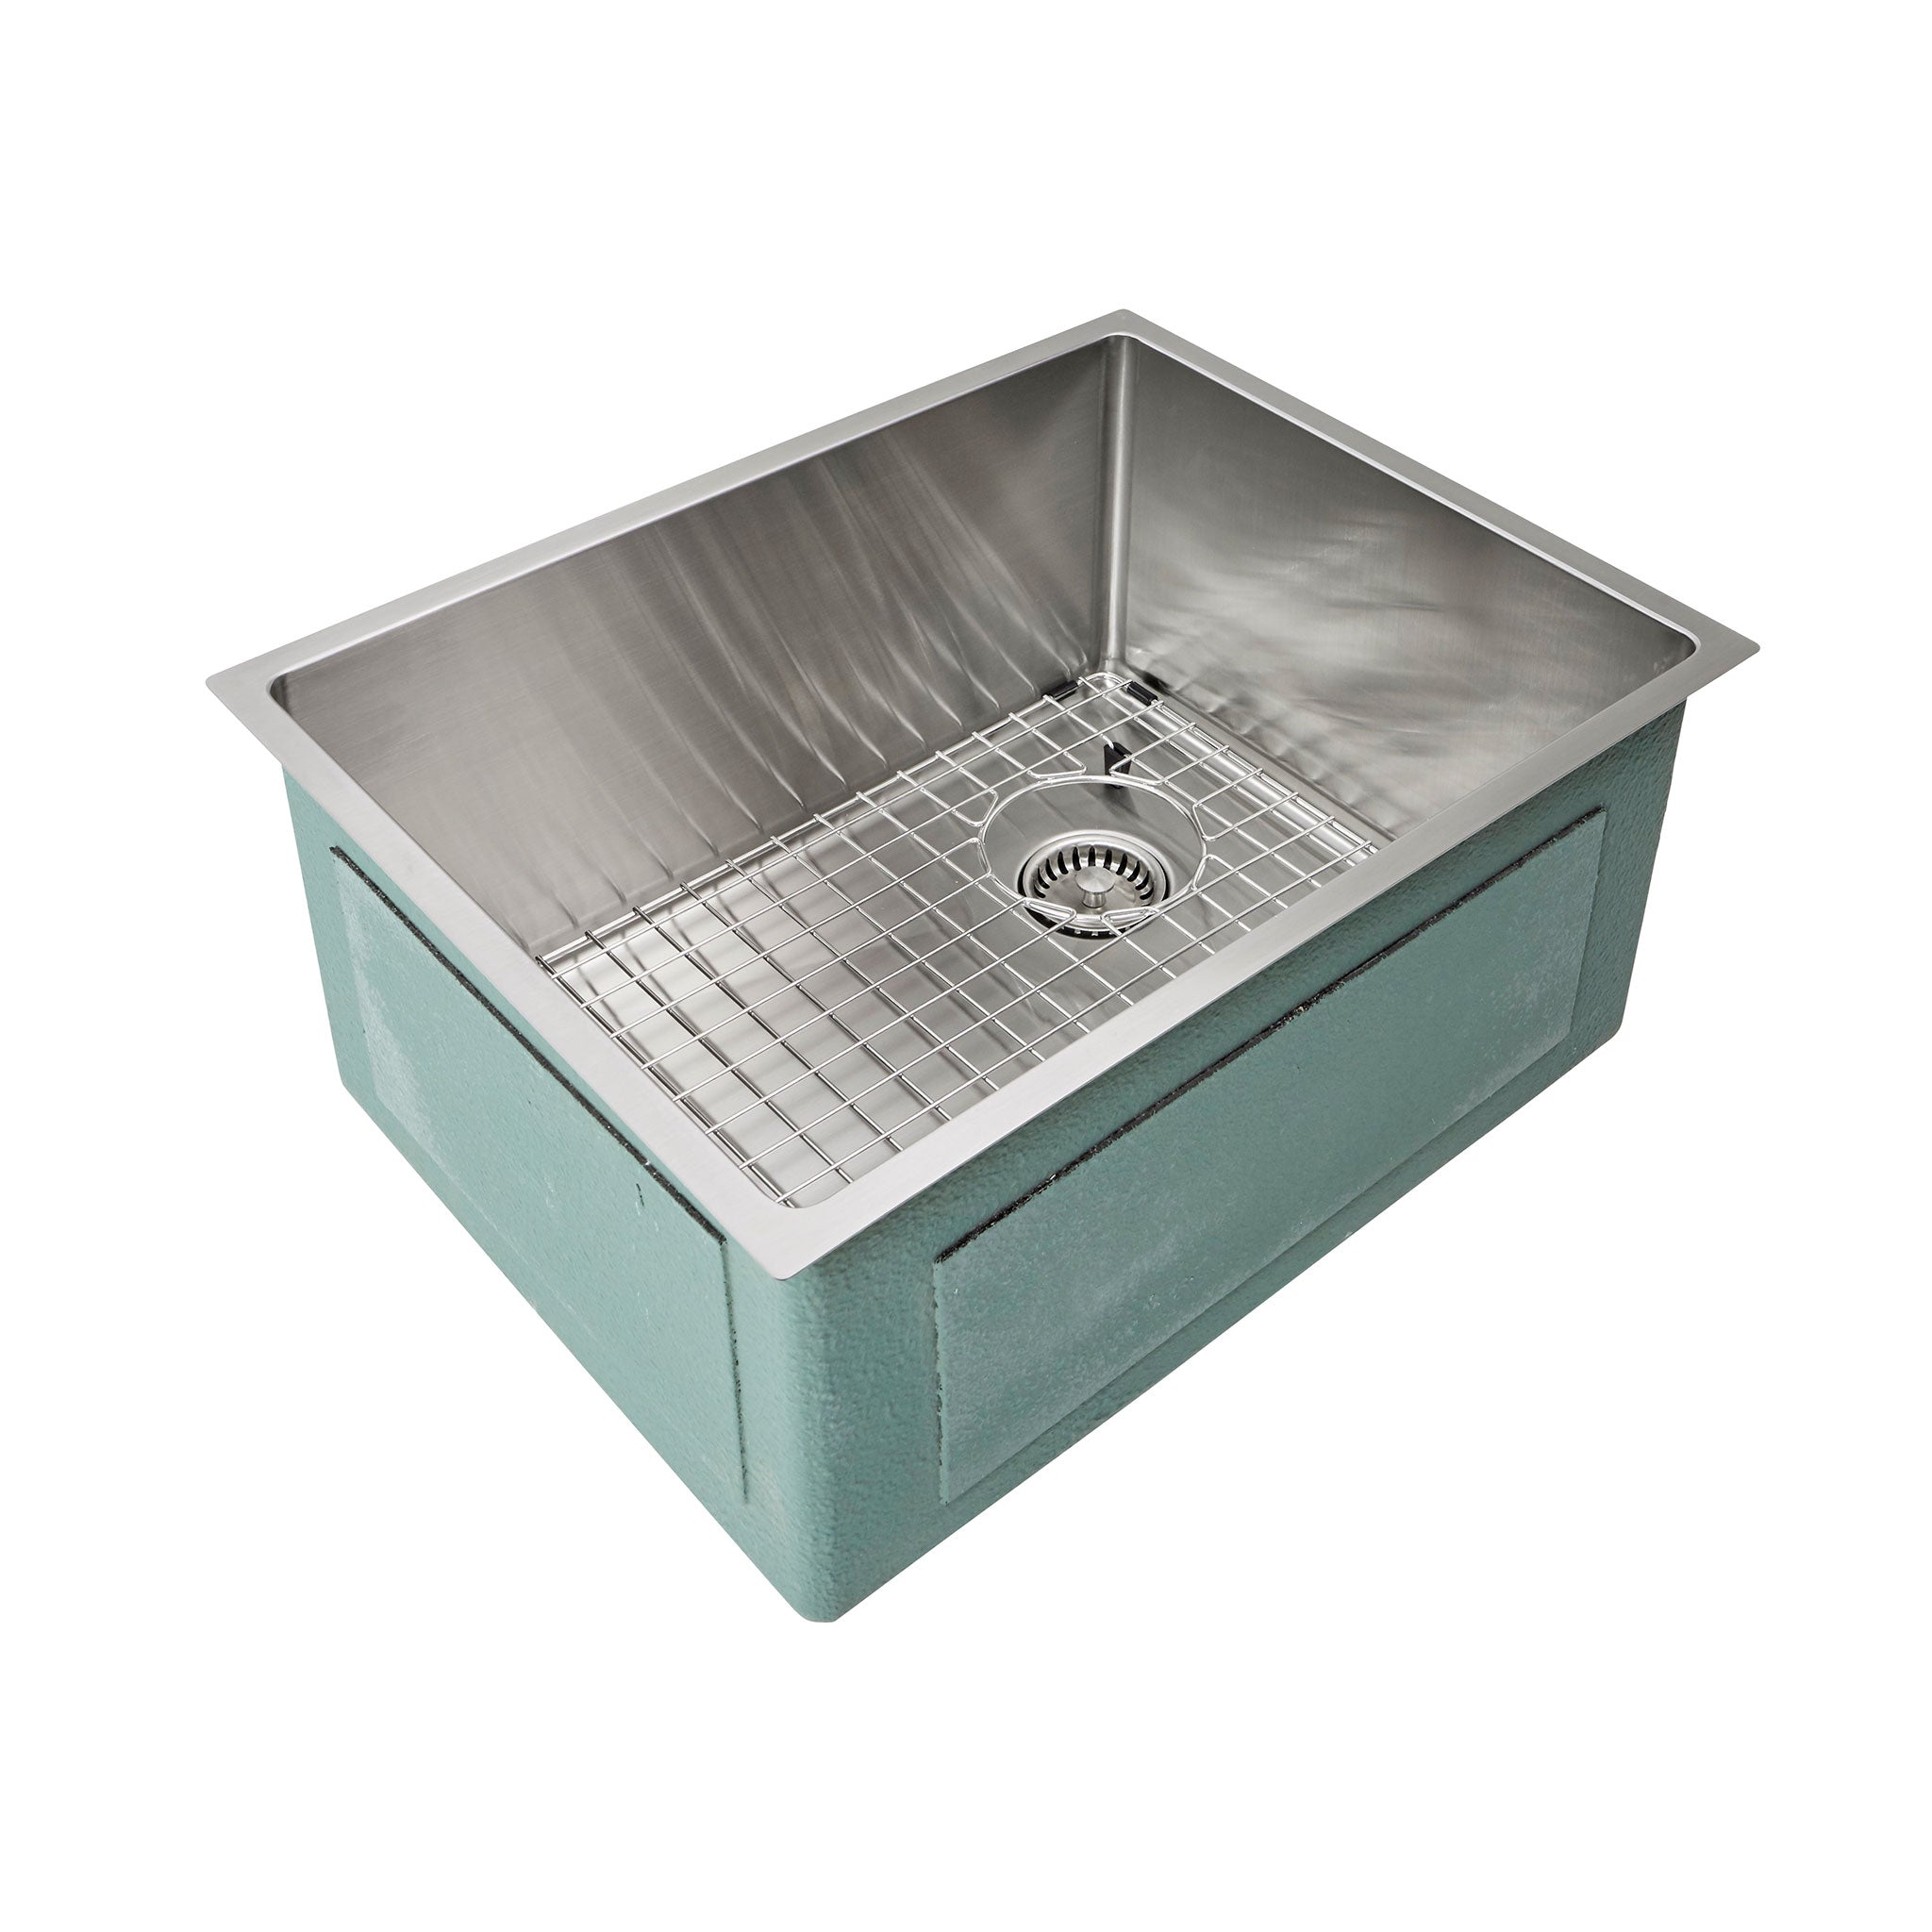 Mid-sized, 22” stainless steel classic, kitchen sink with the seamless drain and basin grid.